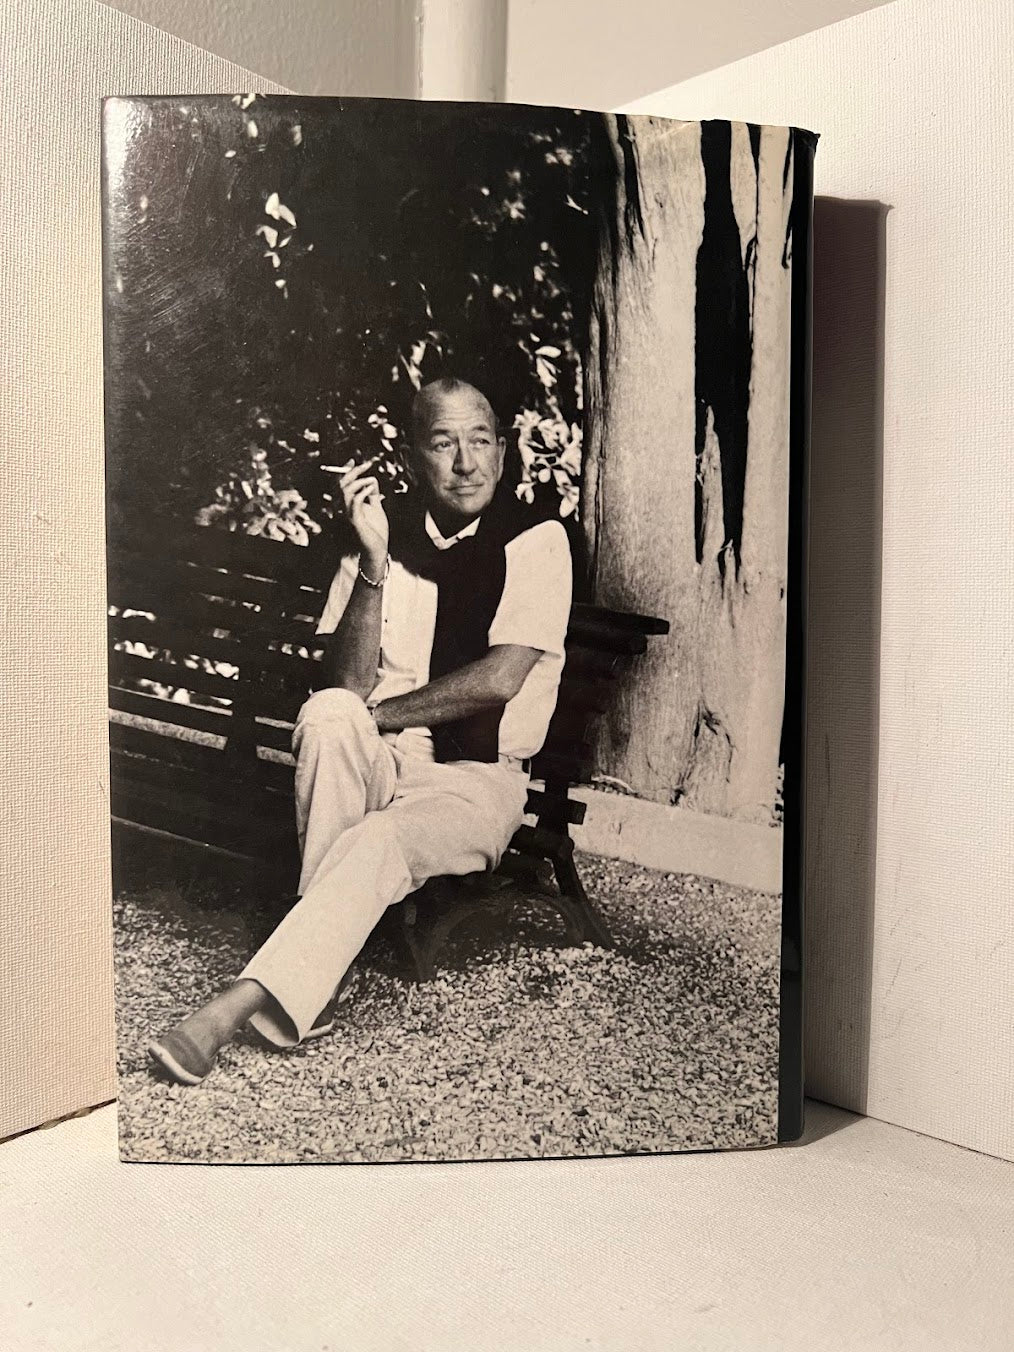 The Collected Stories of Noel Coward